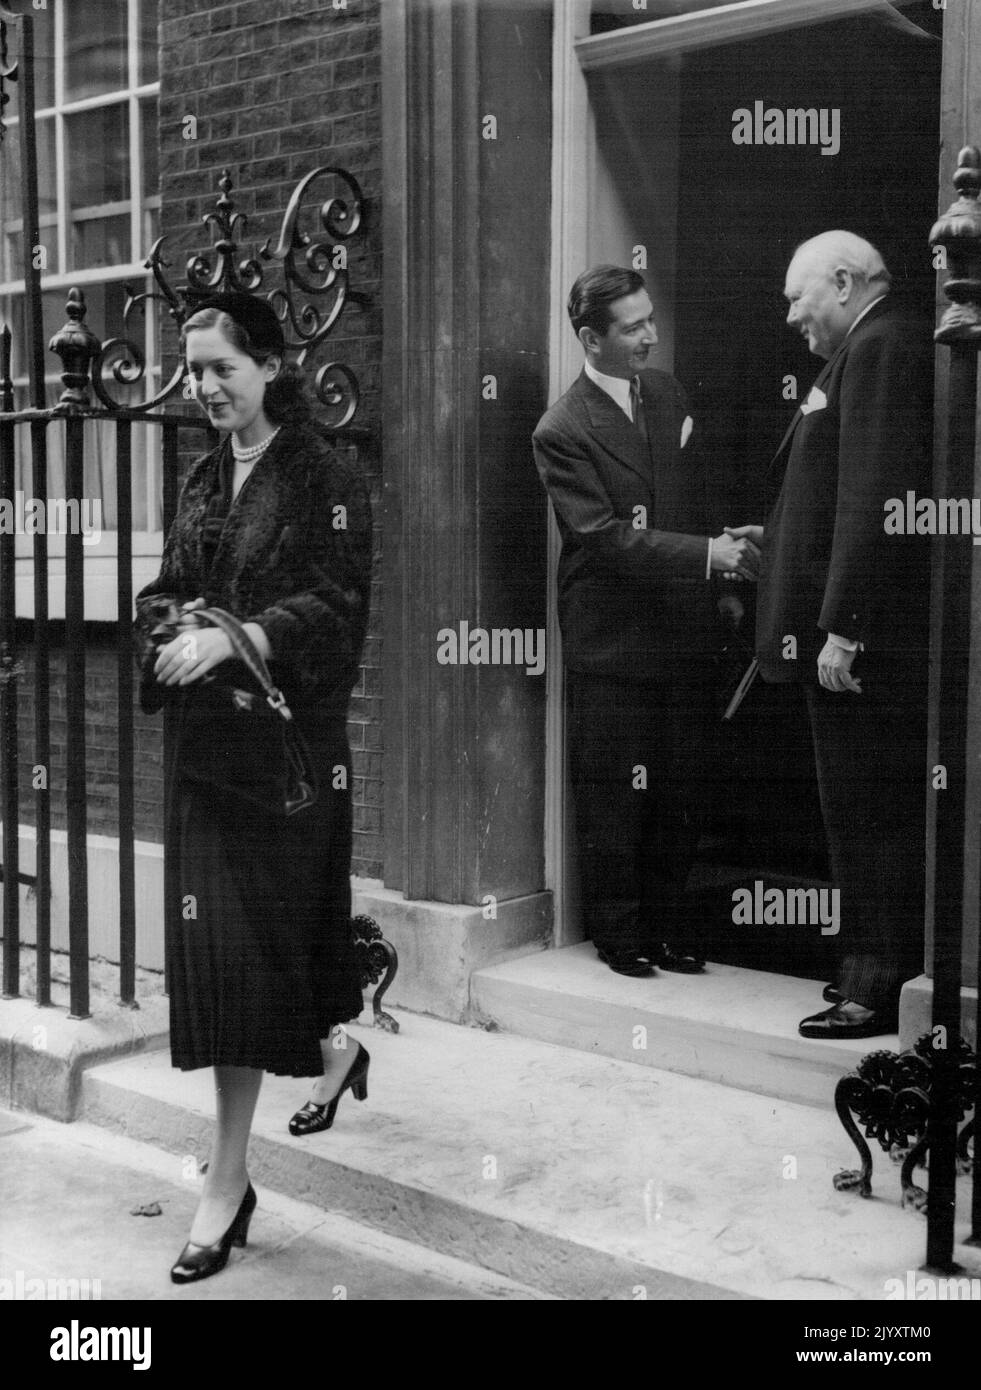 Ex-King Calls Of Churchill Ex-King Peter of Yugoslavia has a cordial handshake for Sir Winston Churchill as he leaves with ex-Queen Alexandra after paying a formal call on the British premier at 10, downing street, London, today (Thursday). Ex-King Peter is in London in connection on with the publication of his memories. March 24, 1955. (Photo by Reuterphoto) Stock Photo